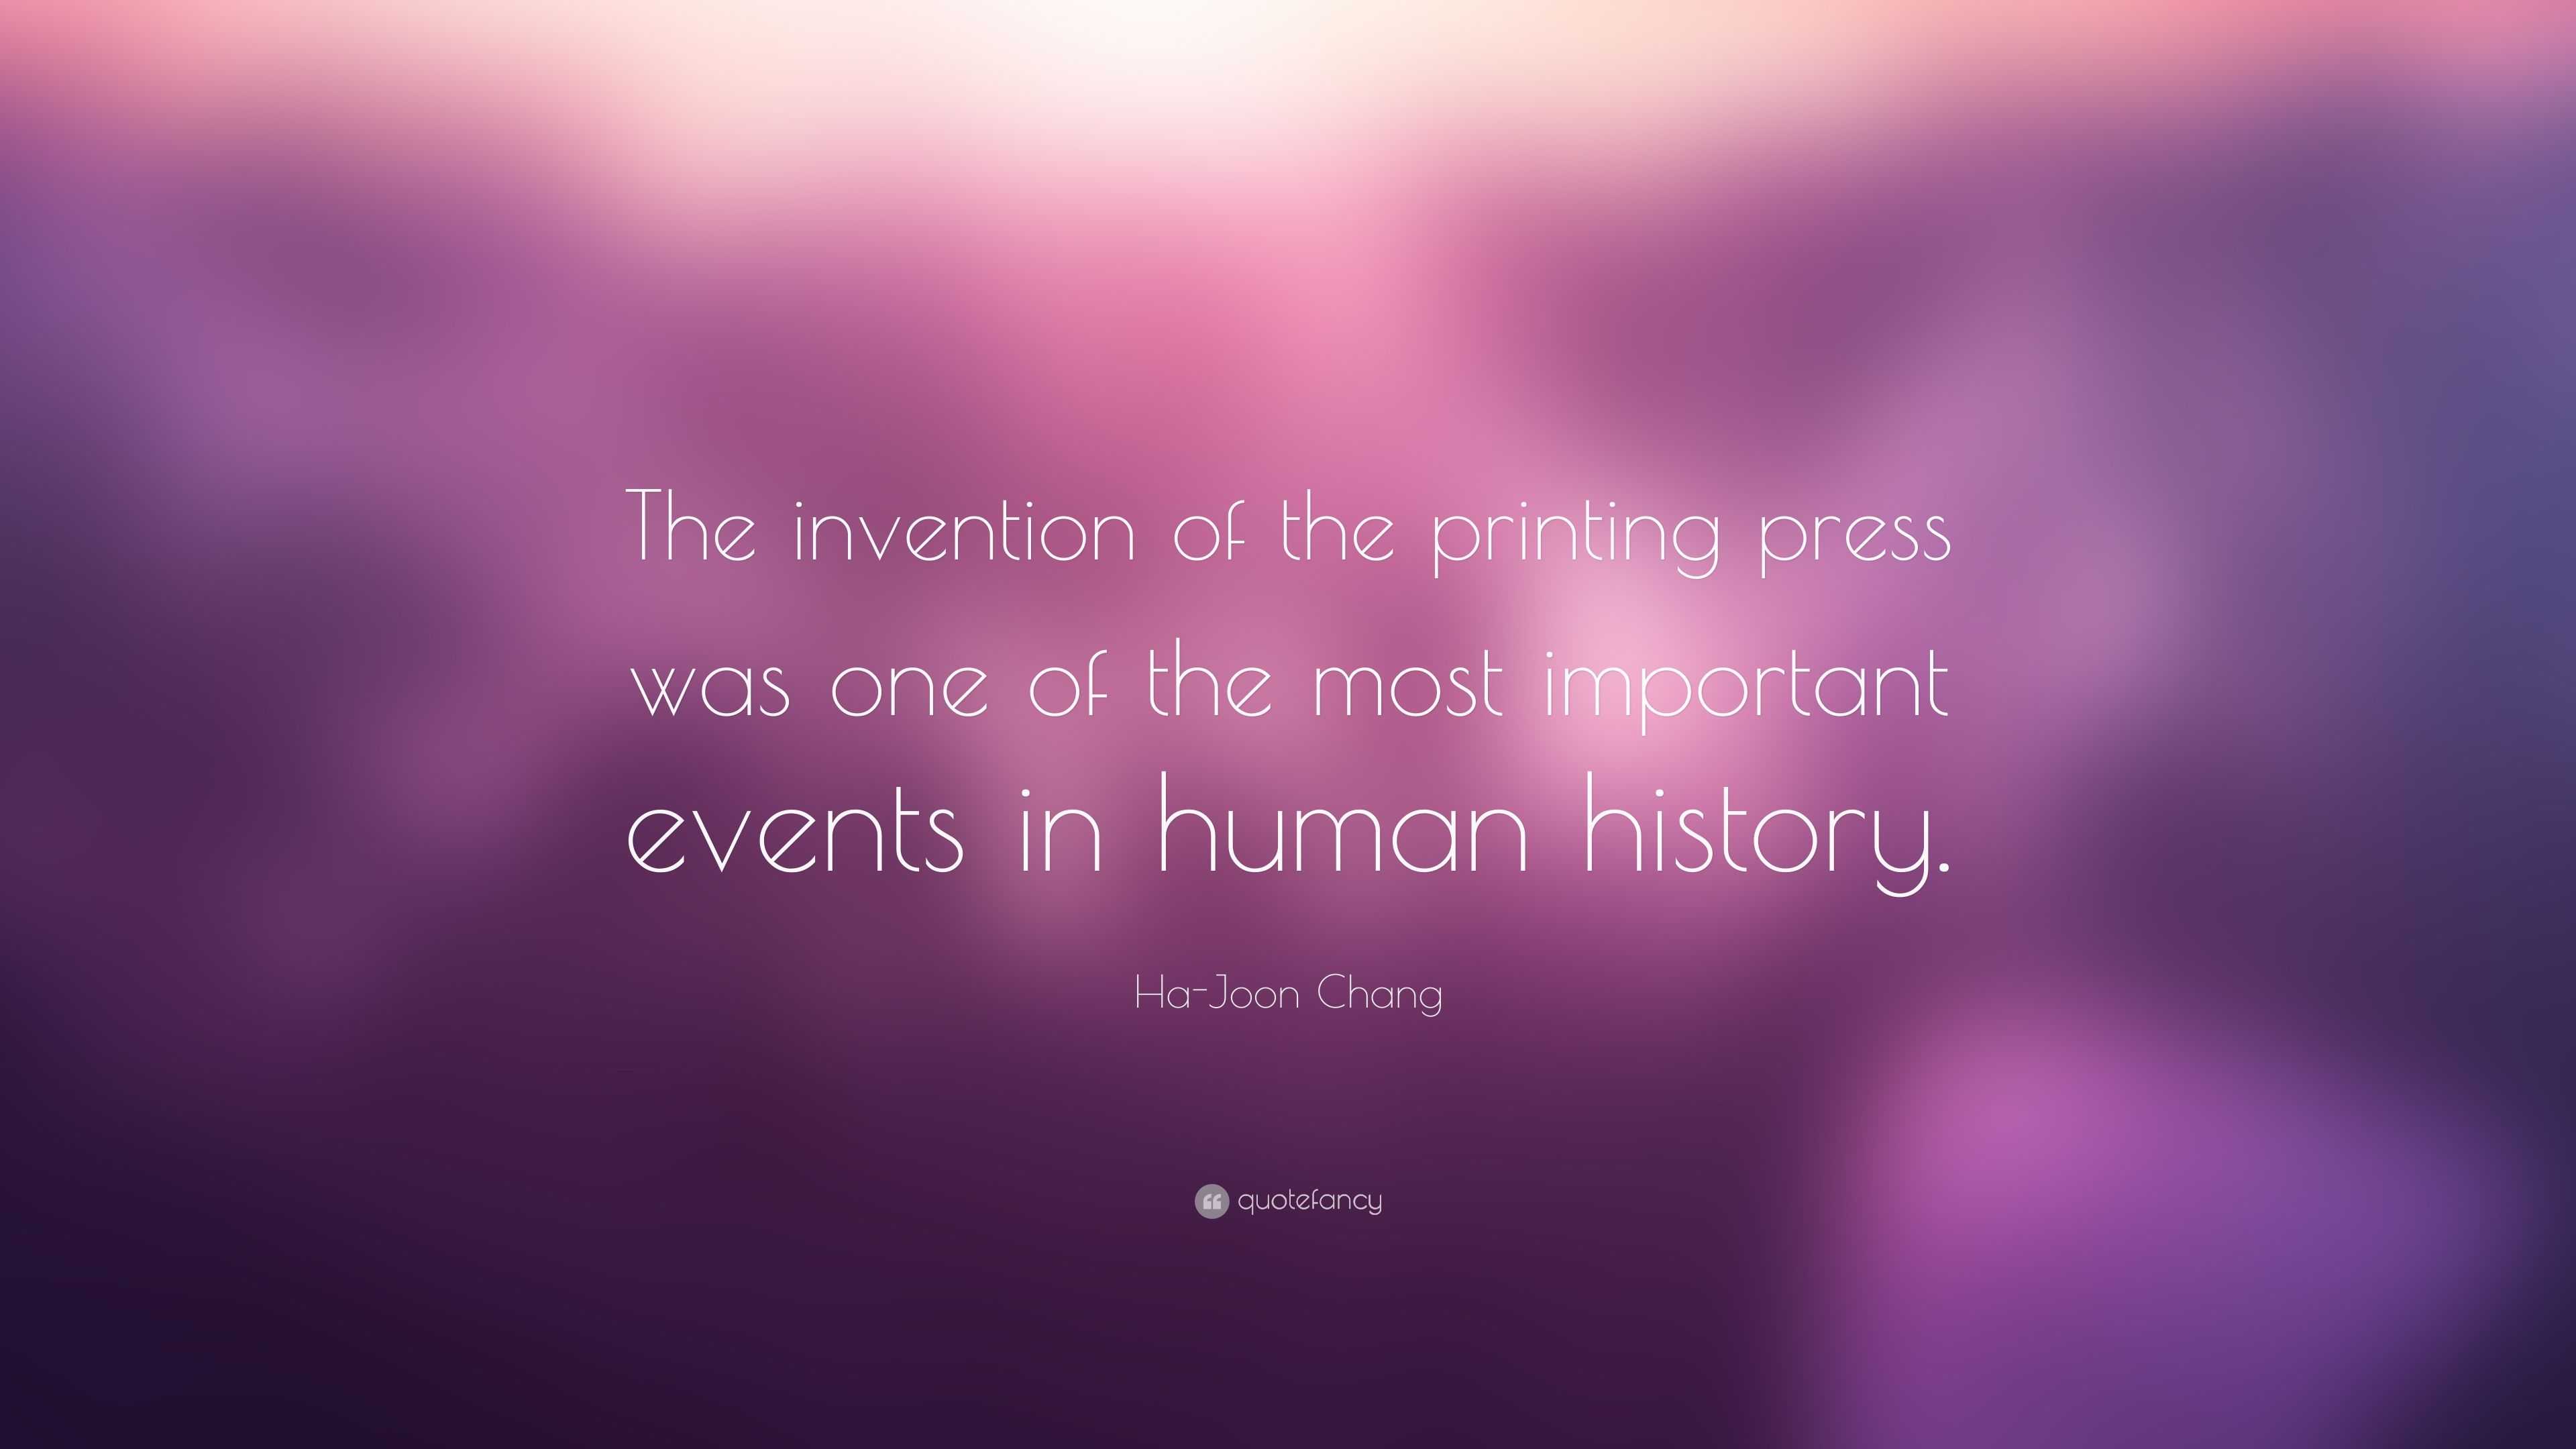 Ha-Joon Chang Quote: “The invention of the printing press was one of ...